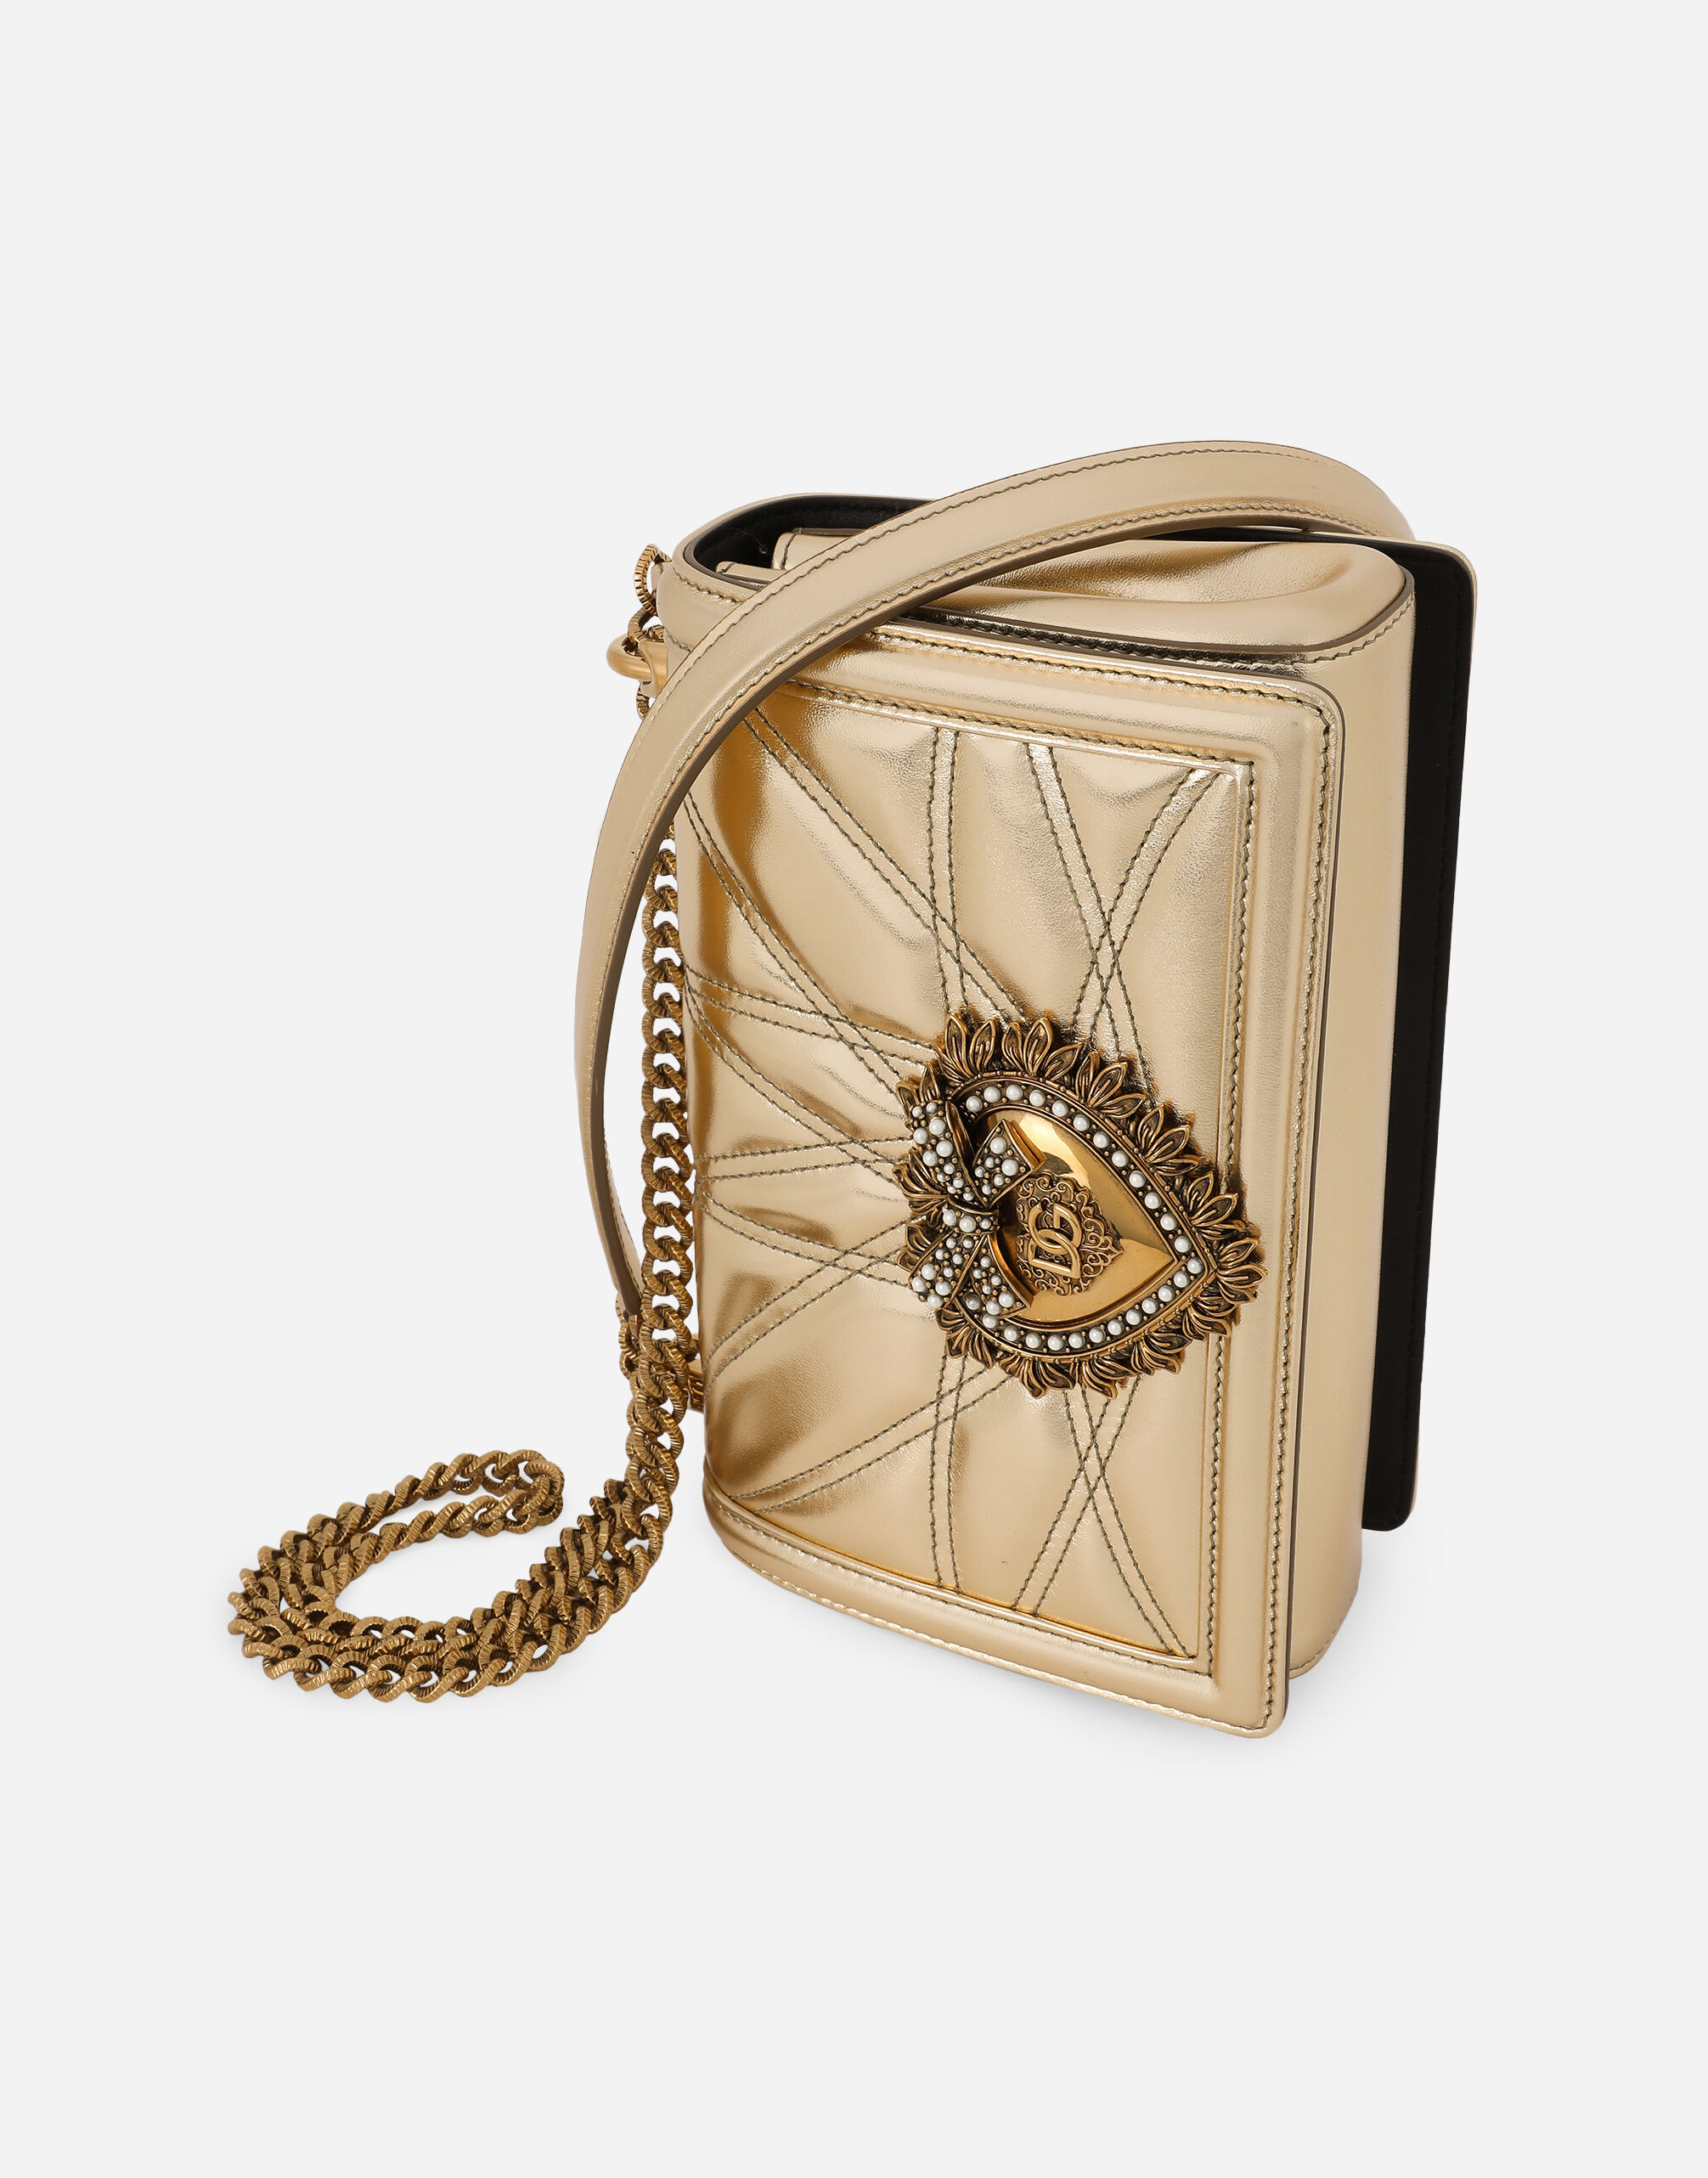 Medium Devotion bag in quilted nappa leather in Gold for Women 